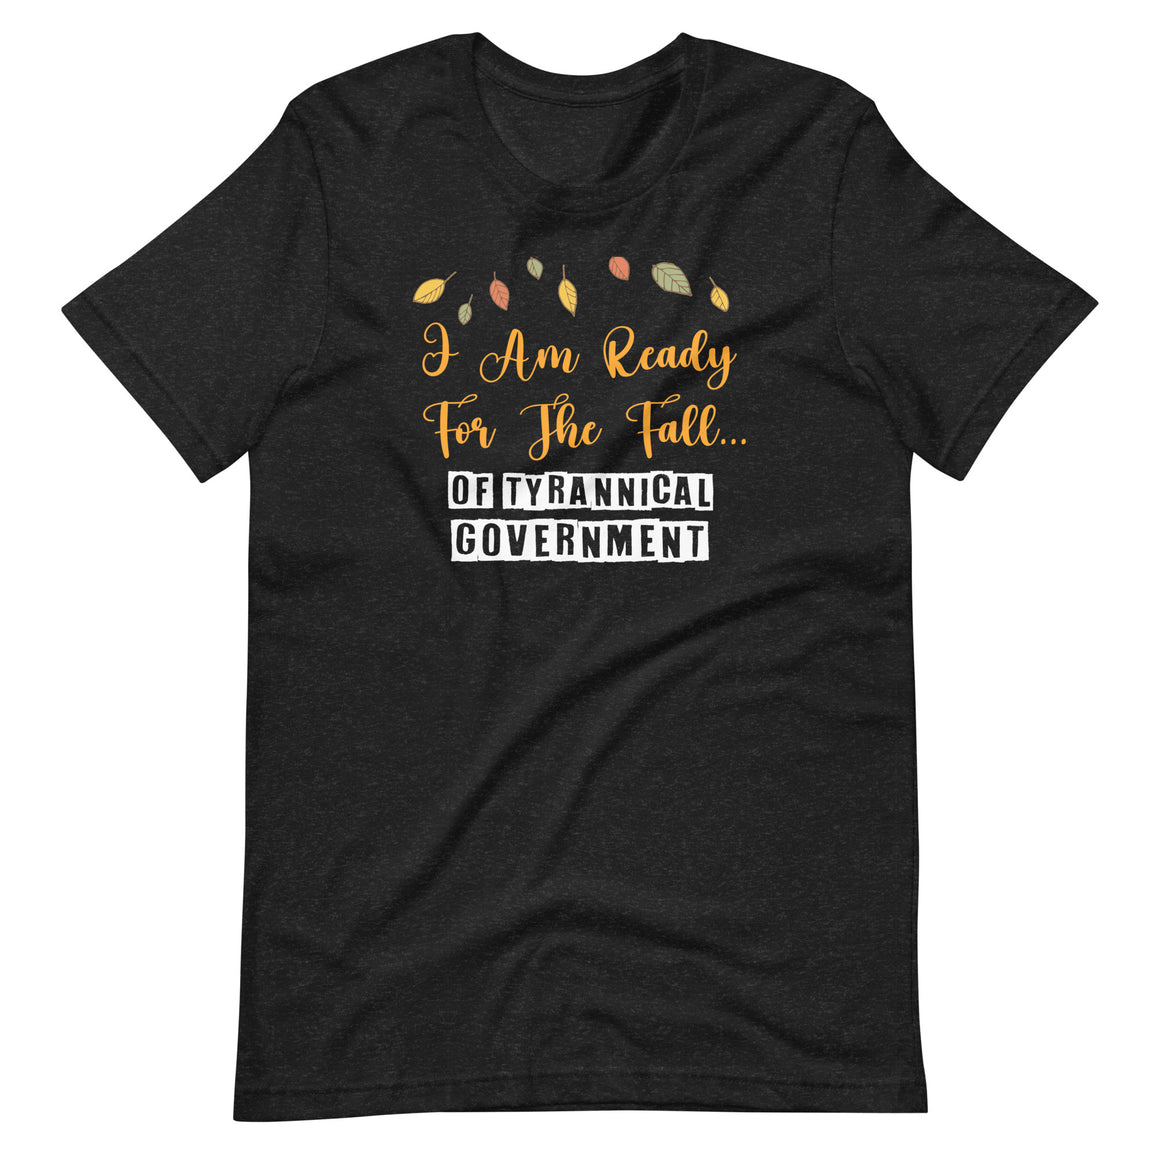 I Am Ready For The Fall Of Tyrannical Government Shirt by Libertarian Country